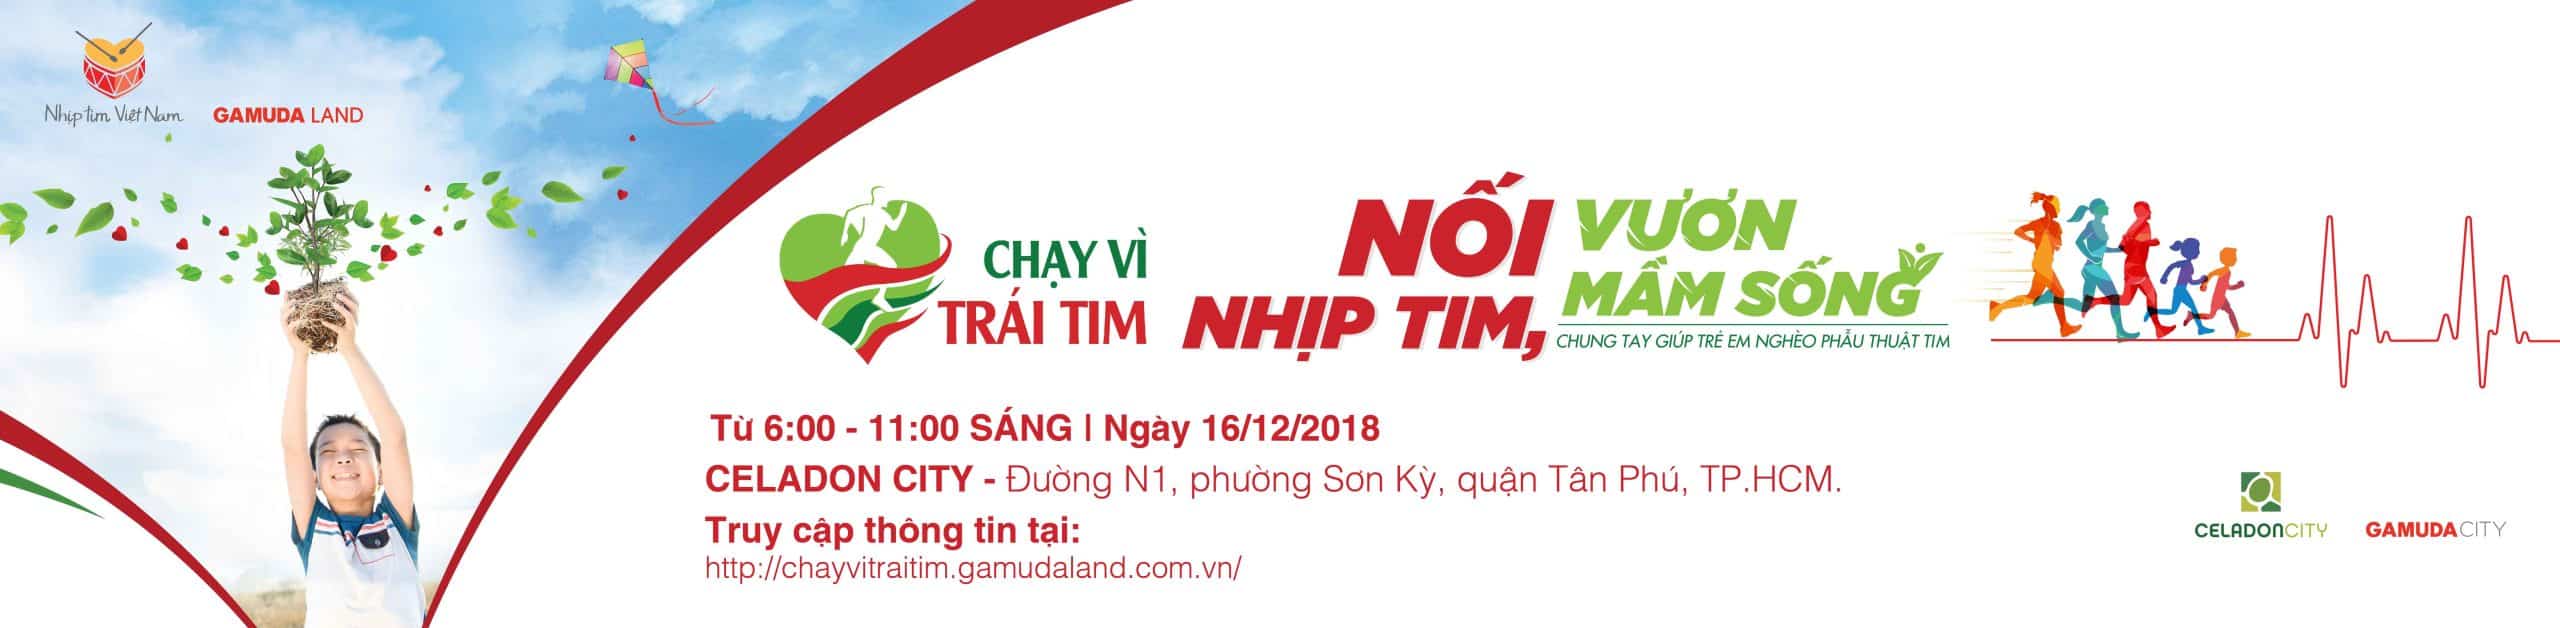 Join Heartbeat Vietnam in The Event “RUN FOR THE HEART 2018” on December 16 2018